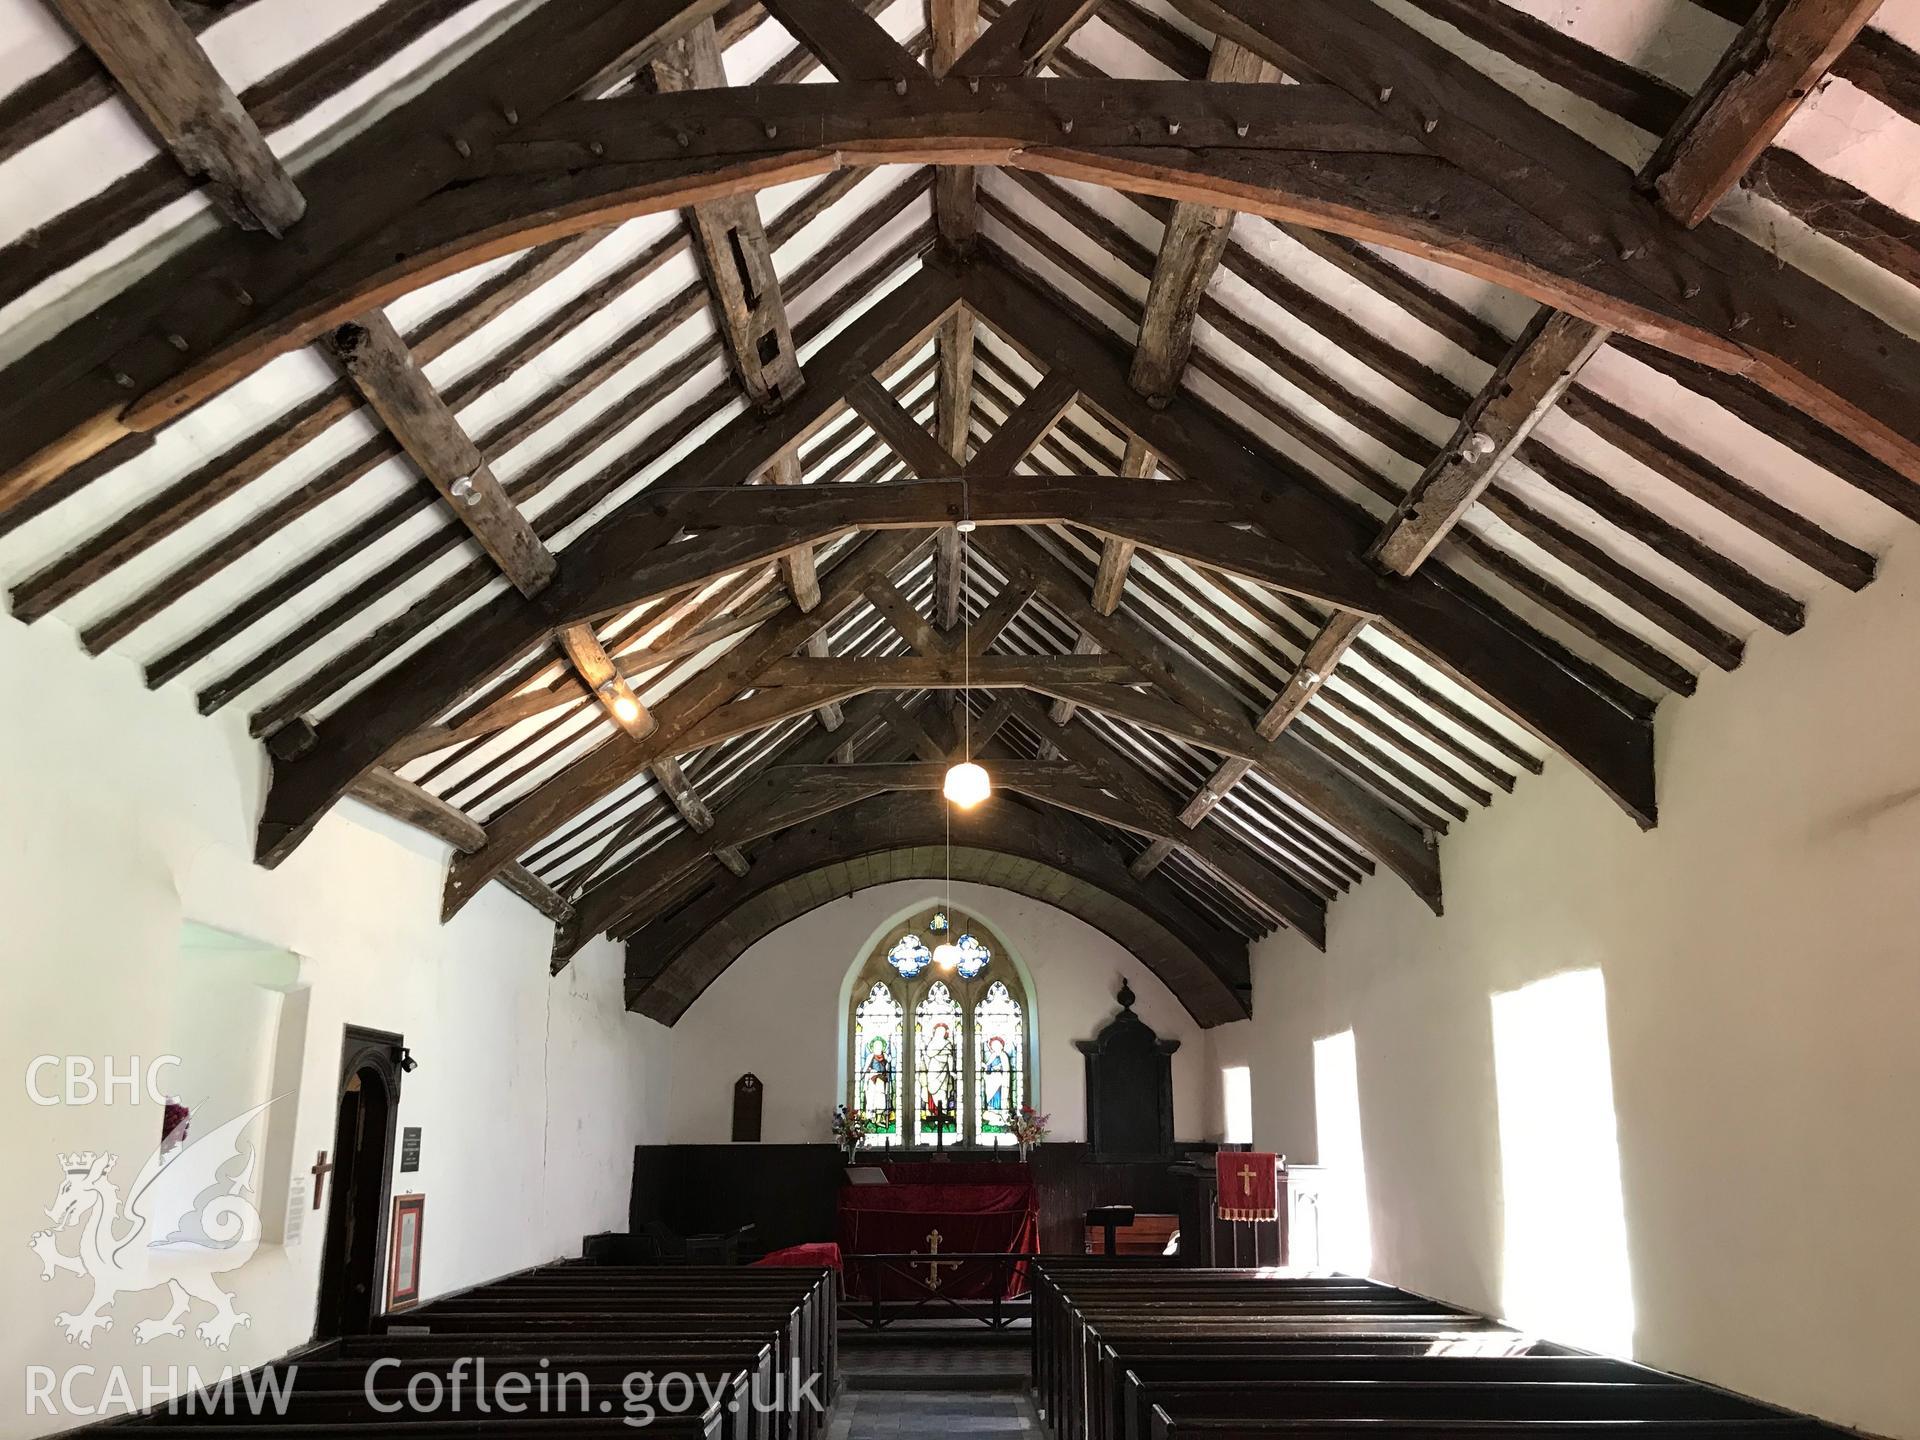 Colour photograph showing interior view of Eglwys Mihangel (St. Michael's Church) looking beyond the pews to the altar, Llanfihangel-y-Pennant, taken by Paul R. Davis on 28th March 2019.